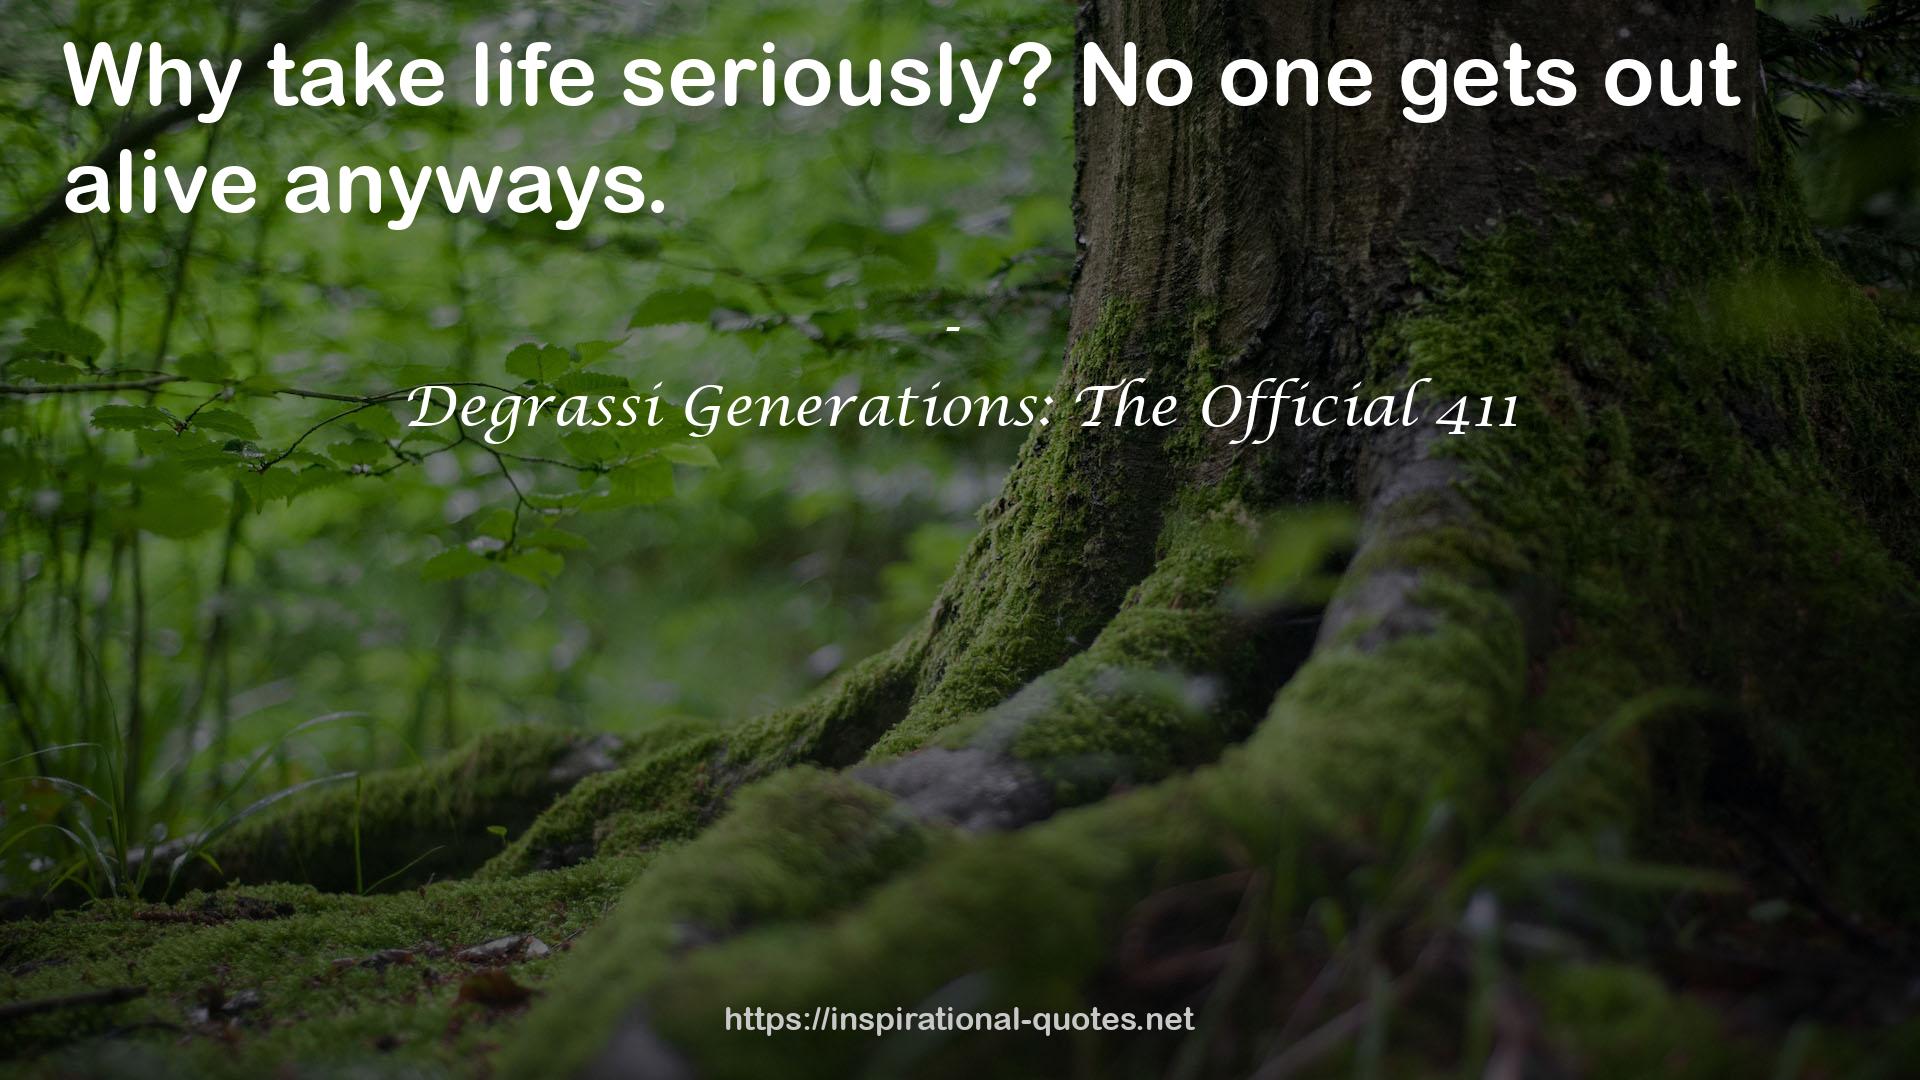 Degrassi Generations: The Official 411 QUOTES